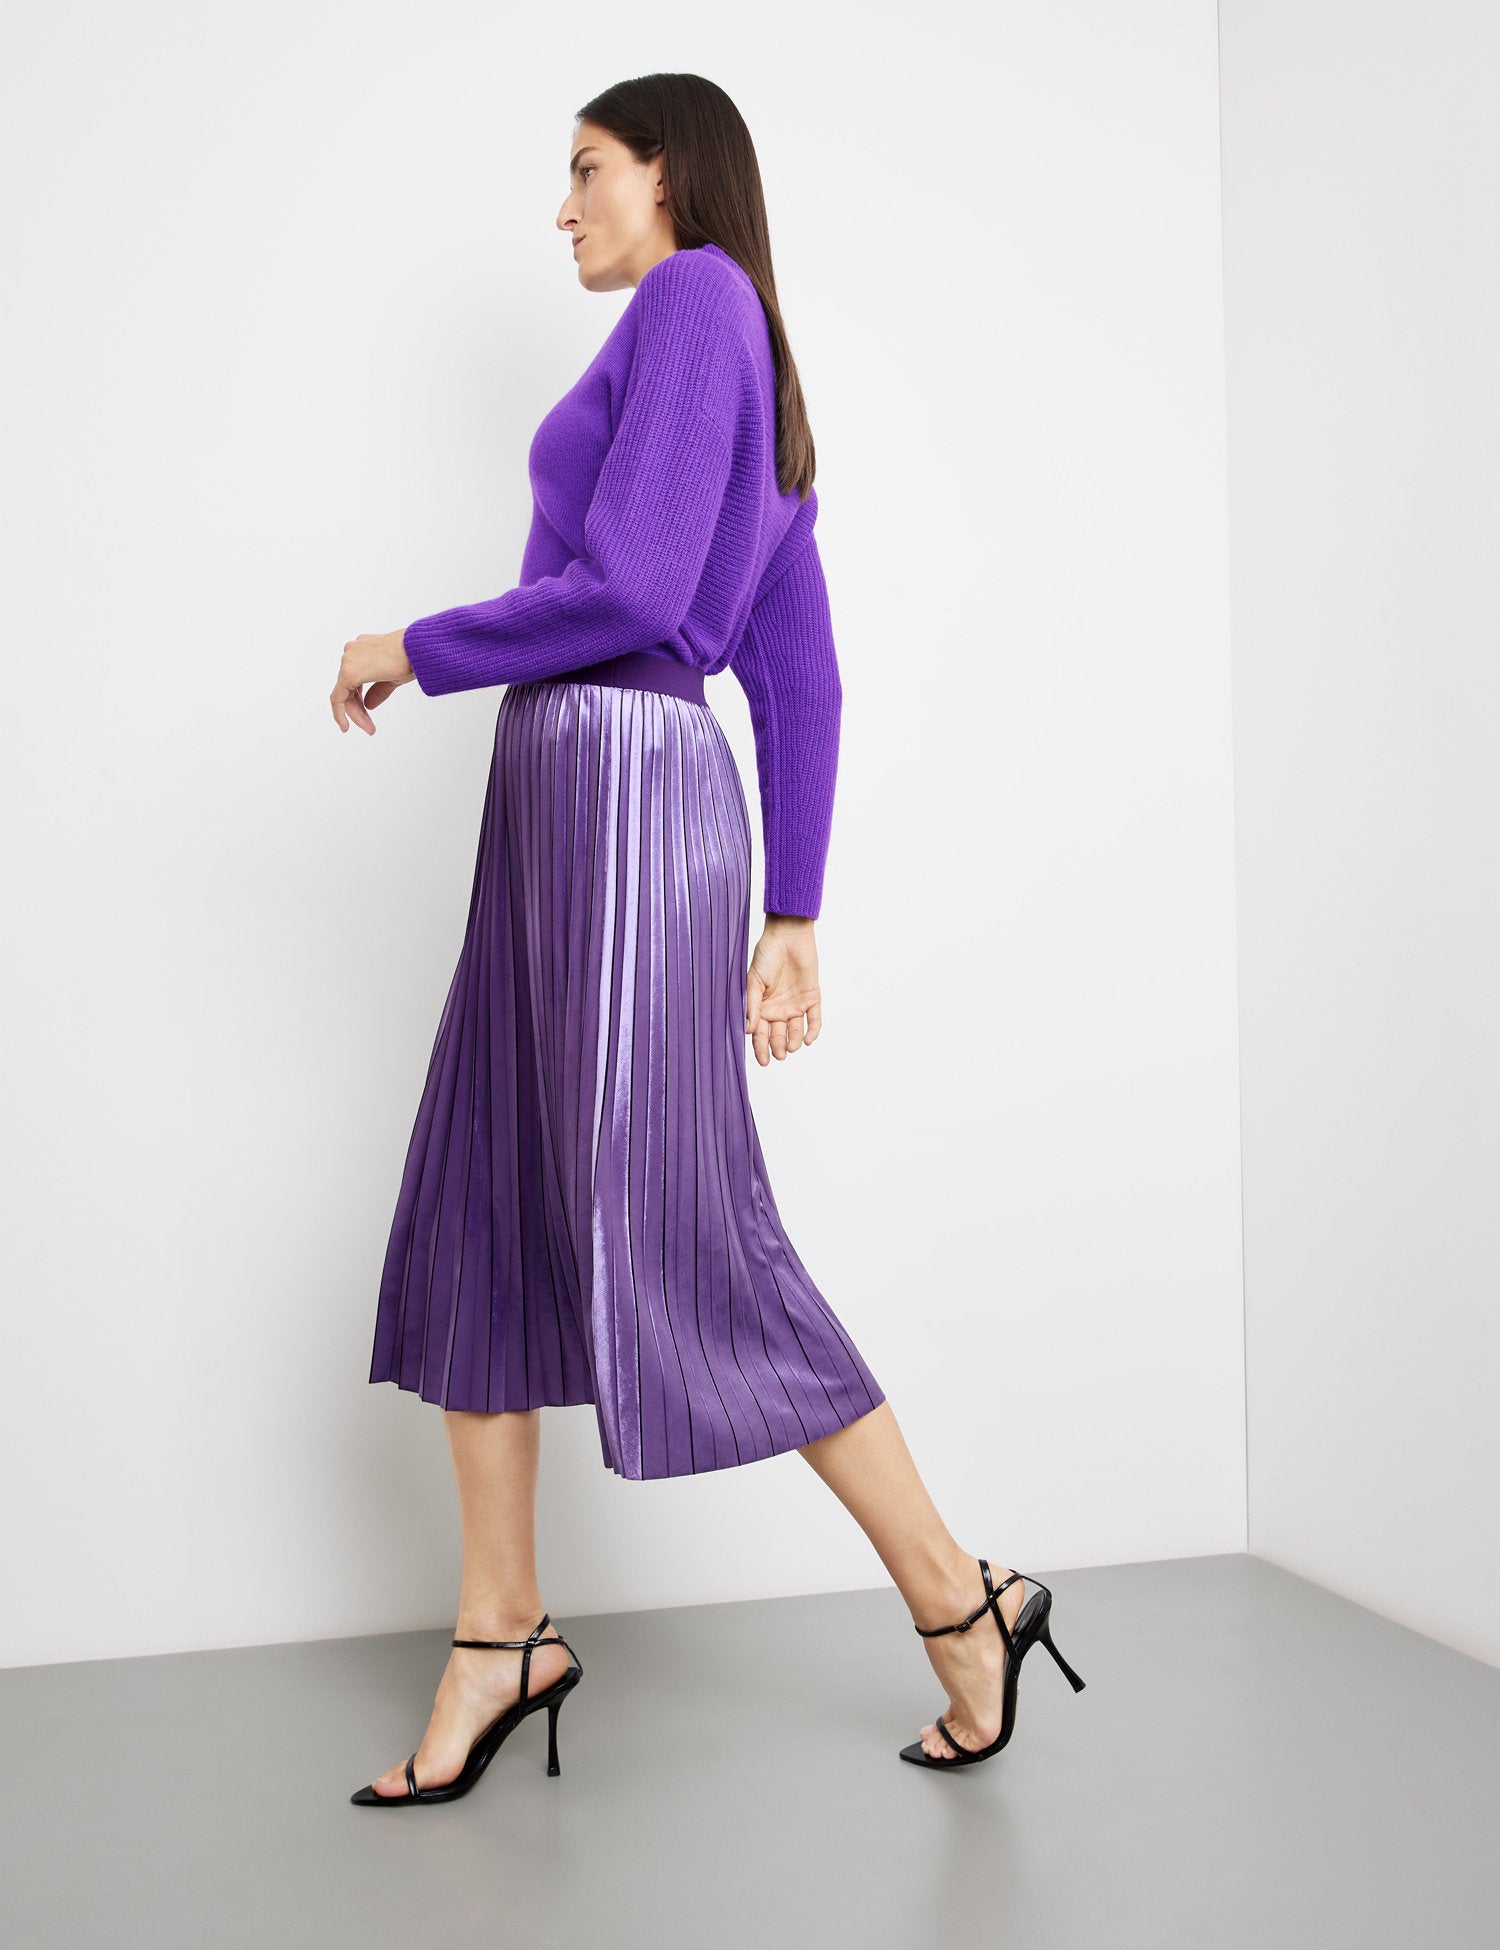 Pleated Skirt With A Subtle Shimmer And An Elasticated Waistband_210036-31531_30909_05